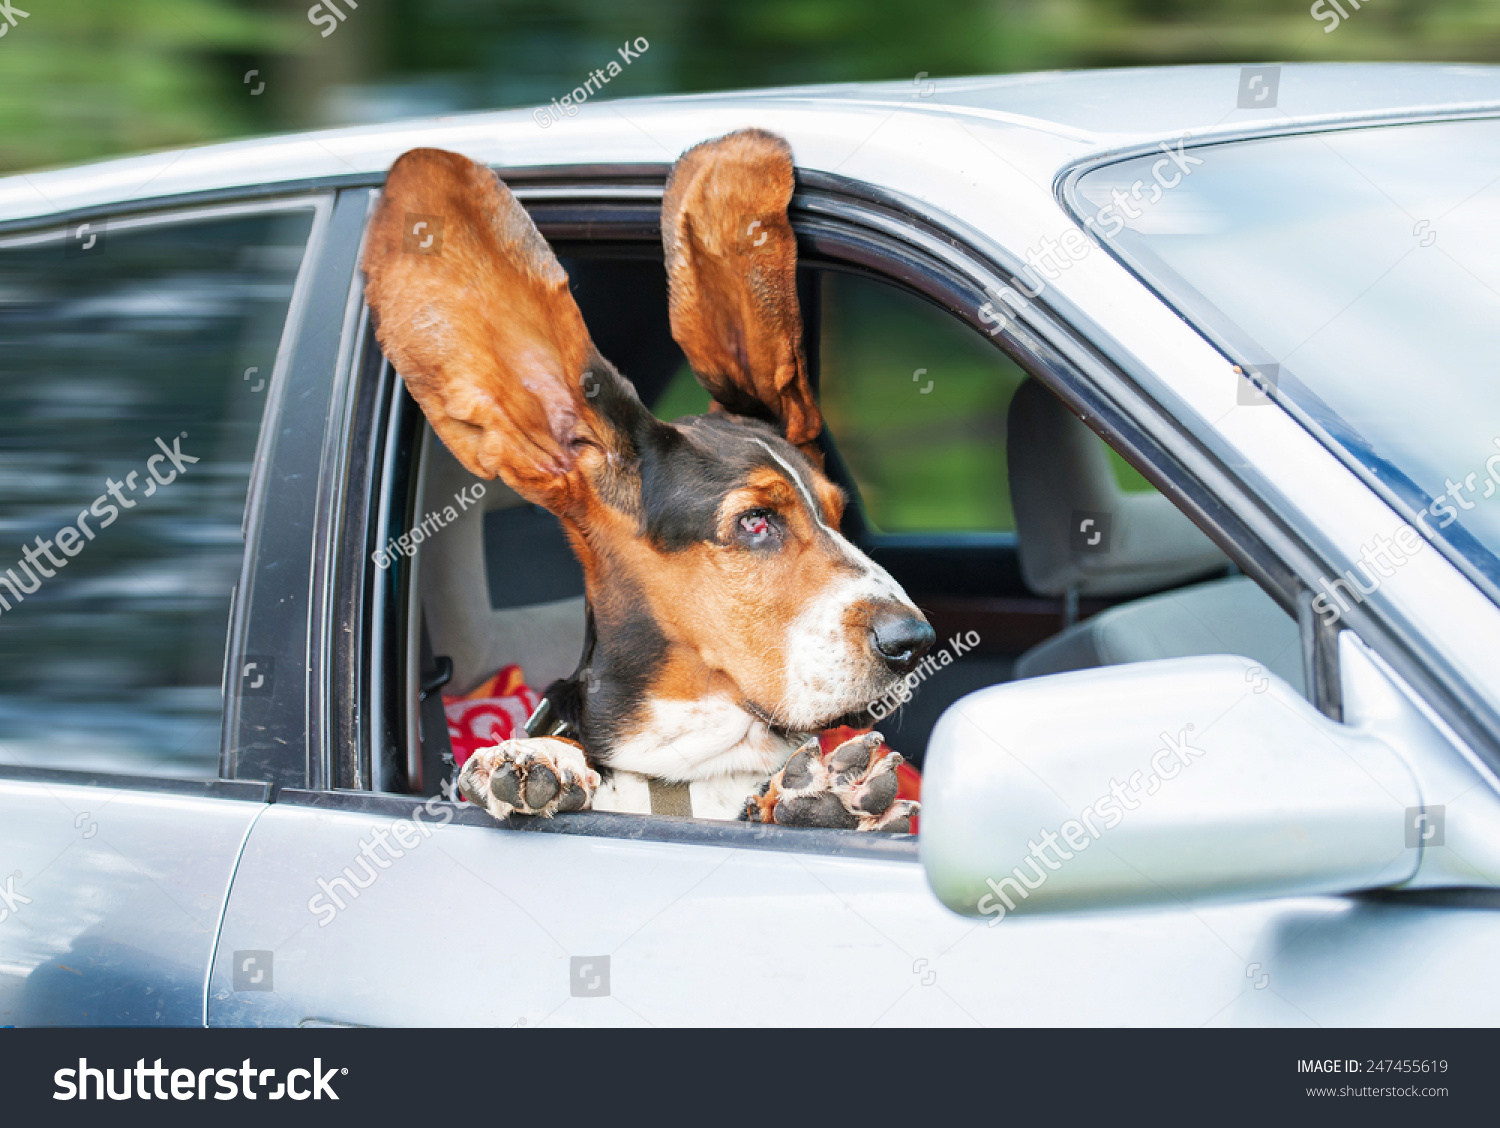 stock-photo-funny-basset-hound-with-ears-up-driving-in-a-car-247455619.jpg